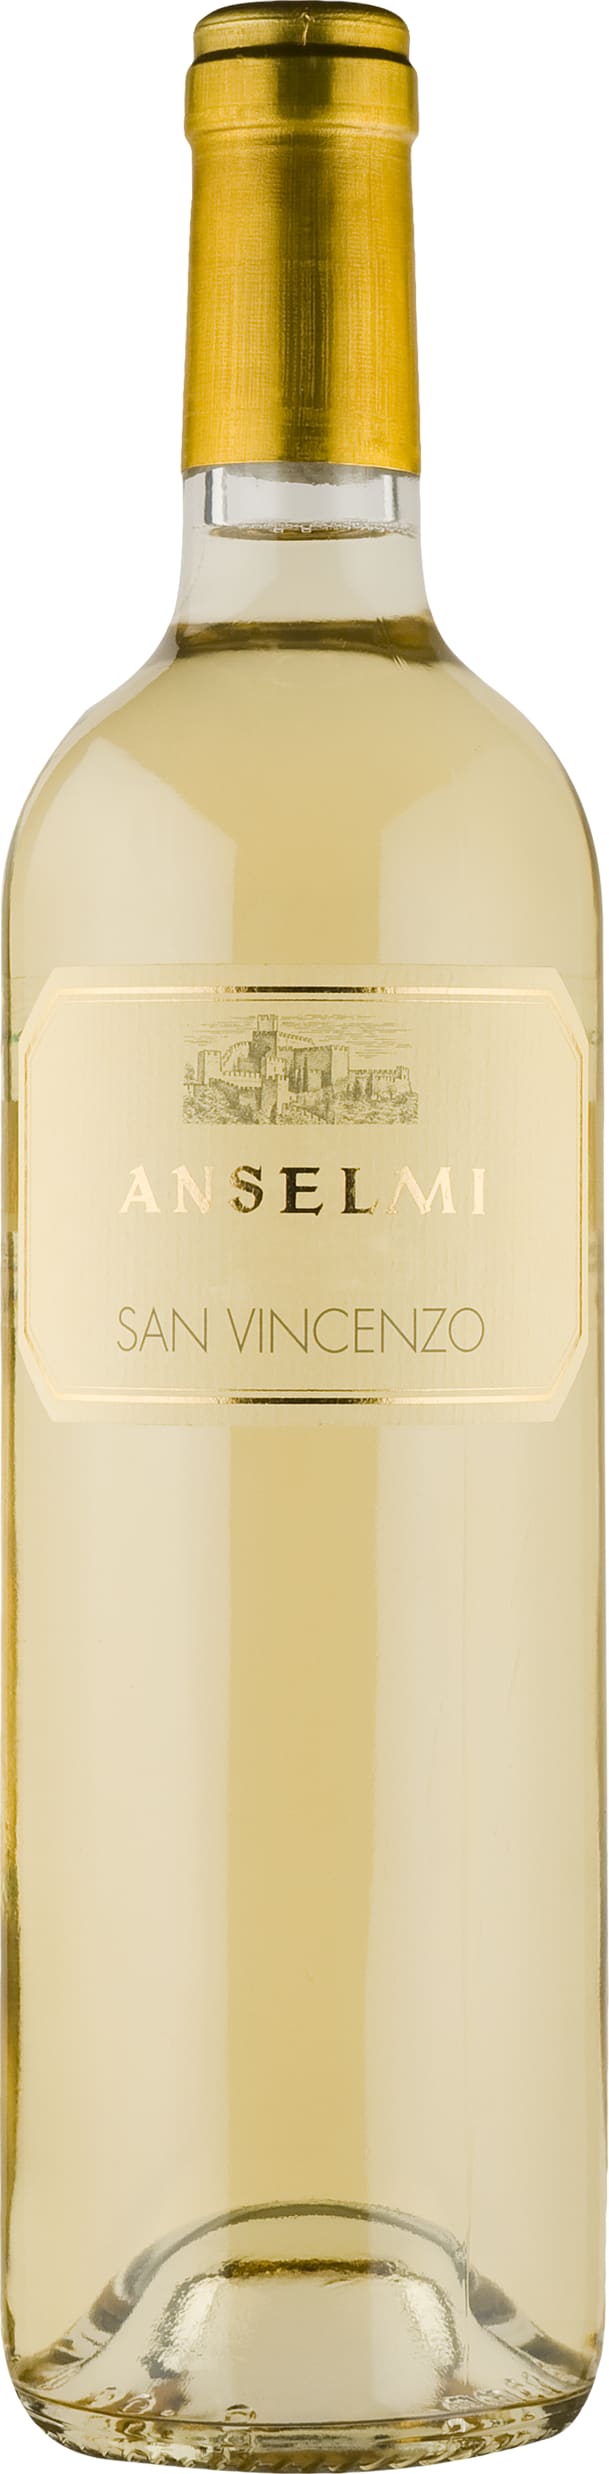 Anselmi San Vincenzo, 375cl bottle 2021 37.5cl - Buy Anselmi Wines from GREAT WINES DIRECT wine shop